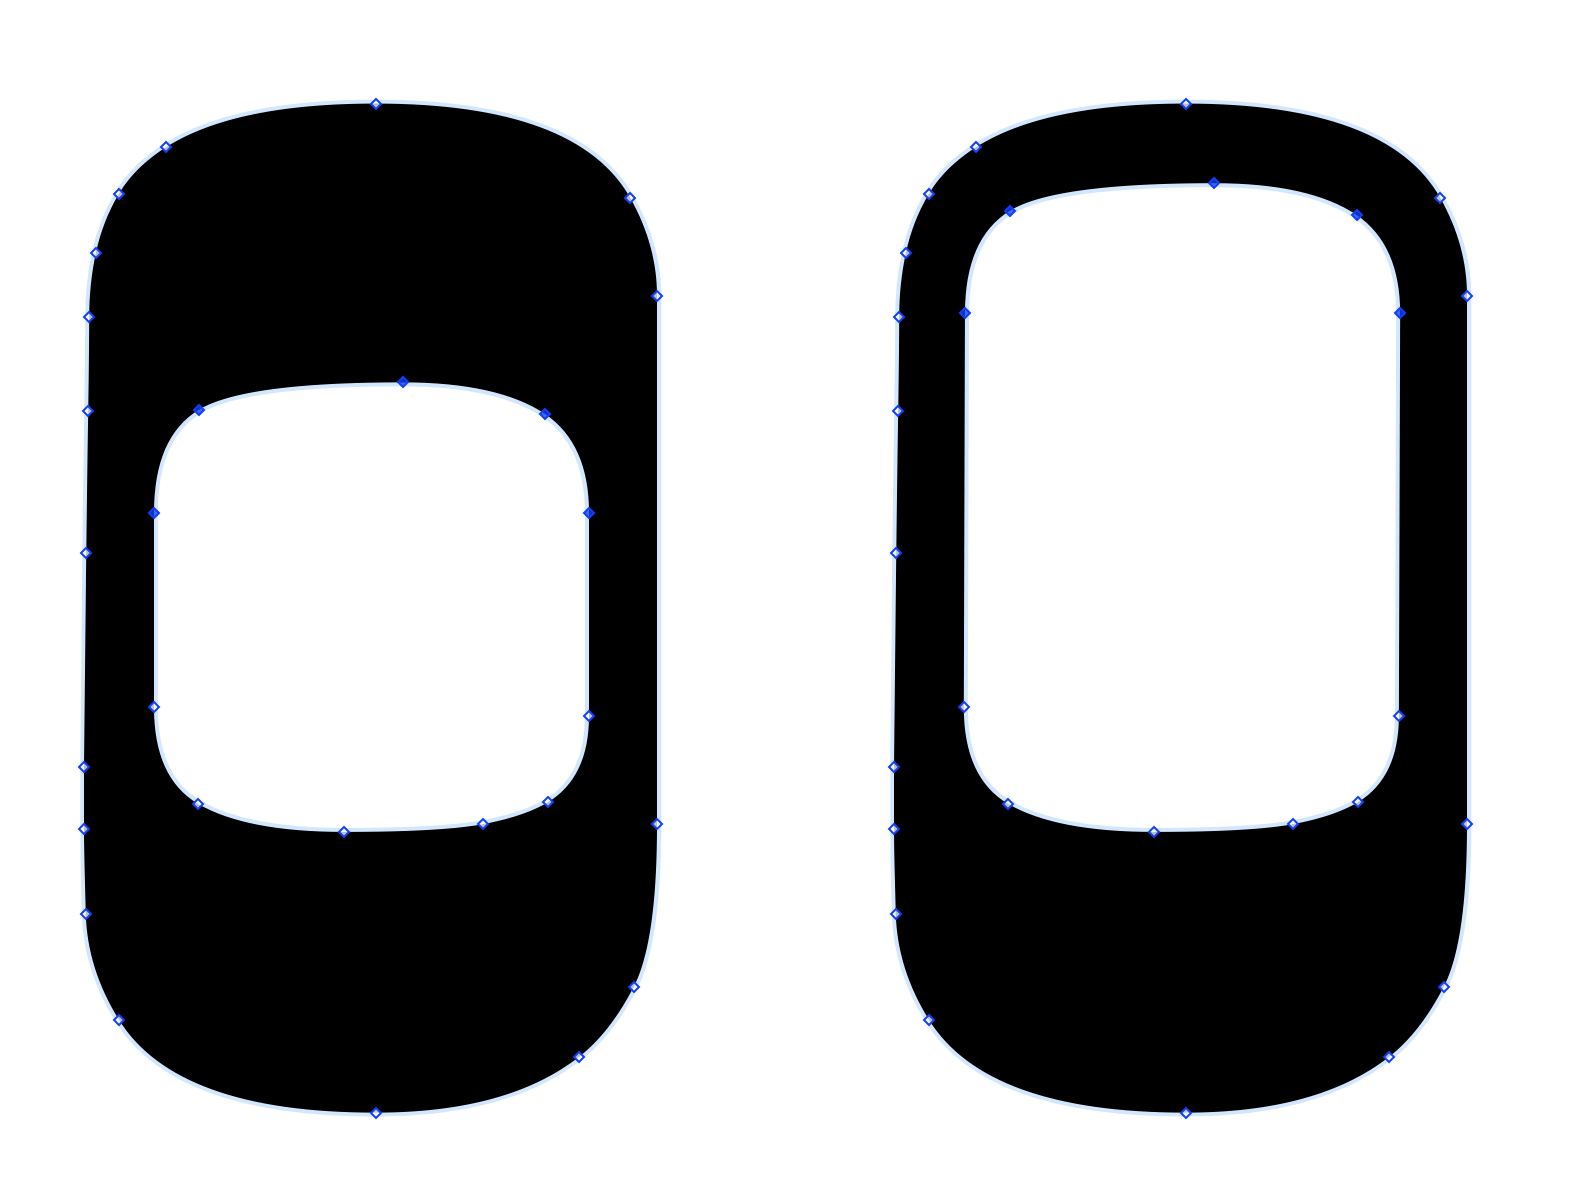 This shows two Oh characters side by side. The Oh on the left has the top five vector points inside the shape selected. The Oh on the right shows that same Oh character after the selected vector points have been moved upward within the character.